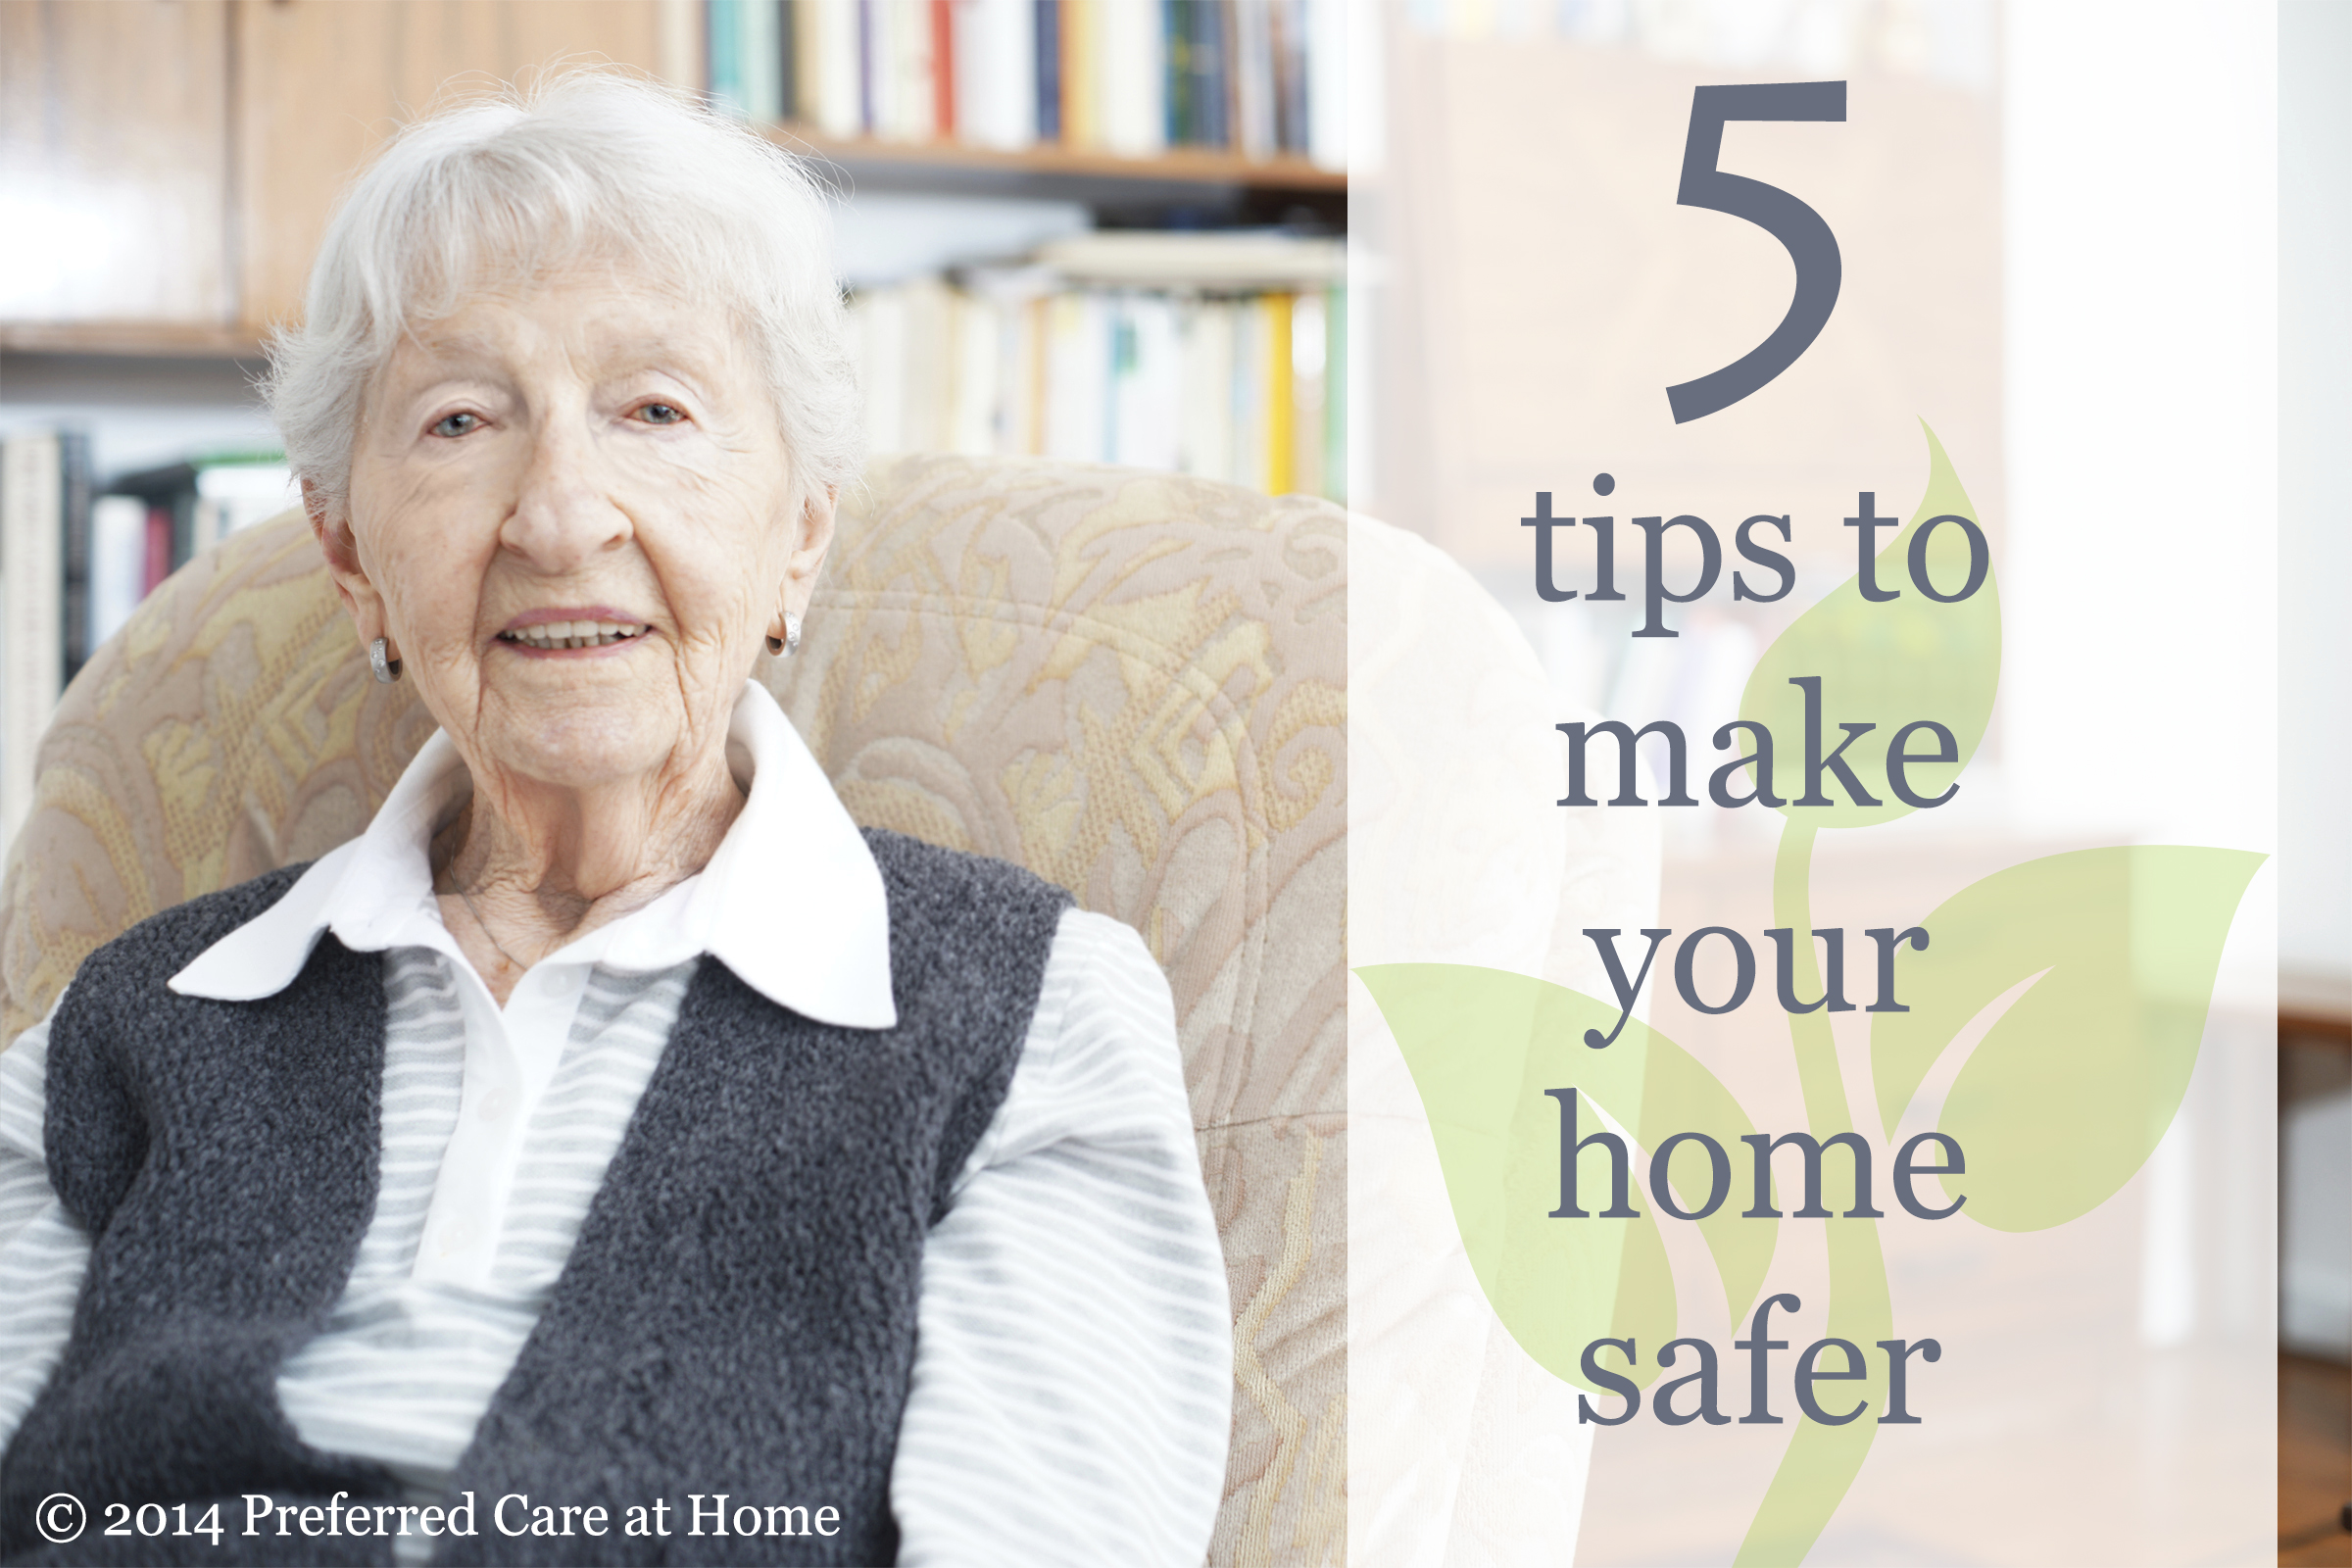 Home Safety: 5 Tips to a Safer Home